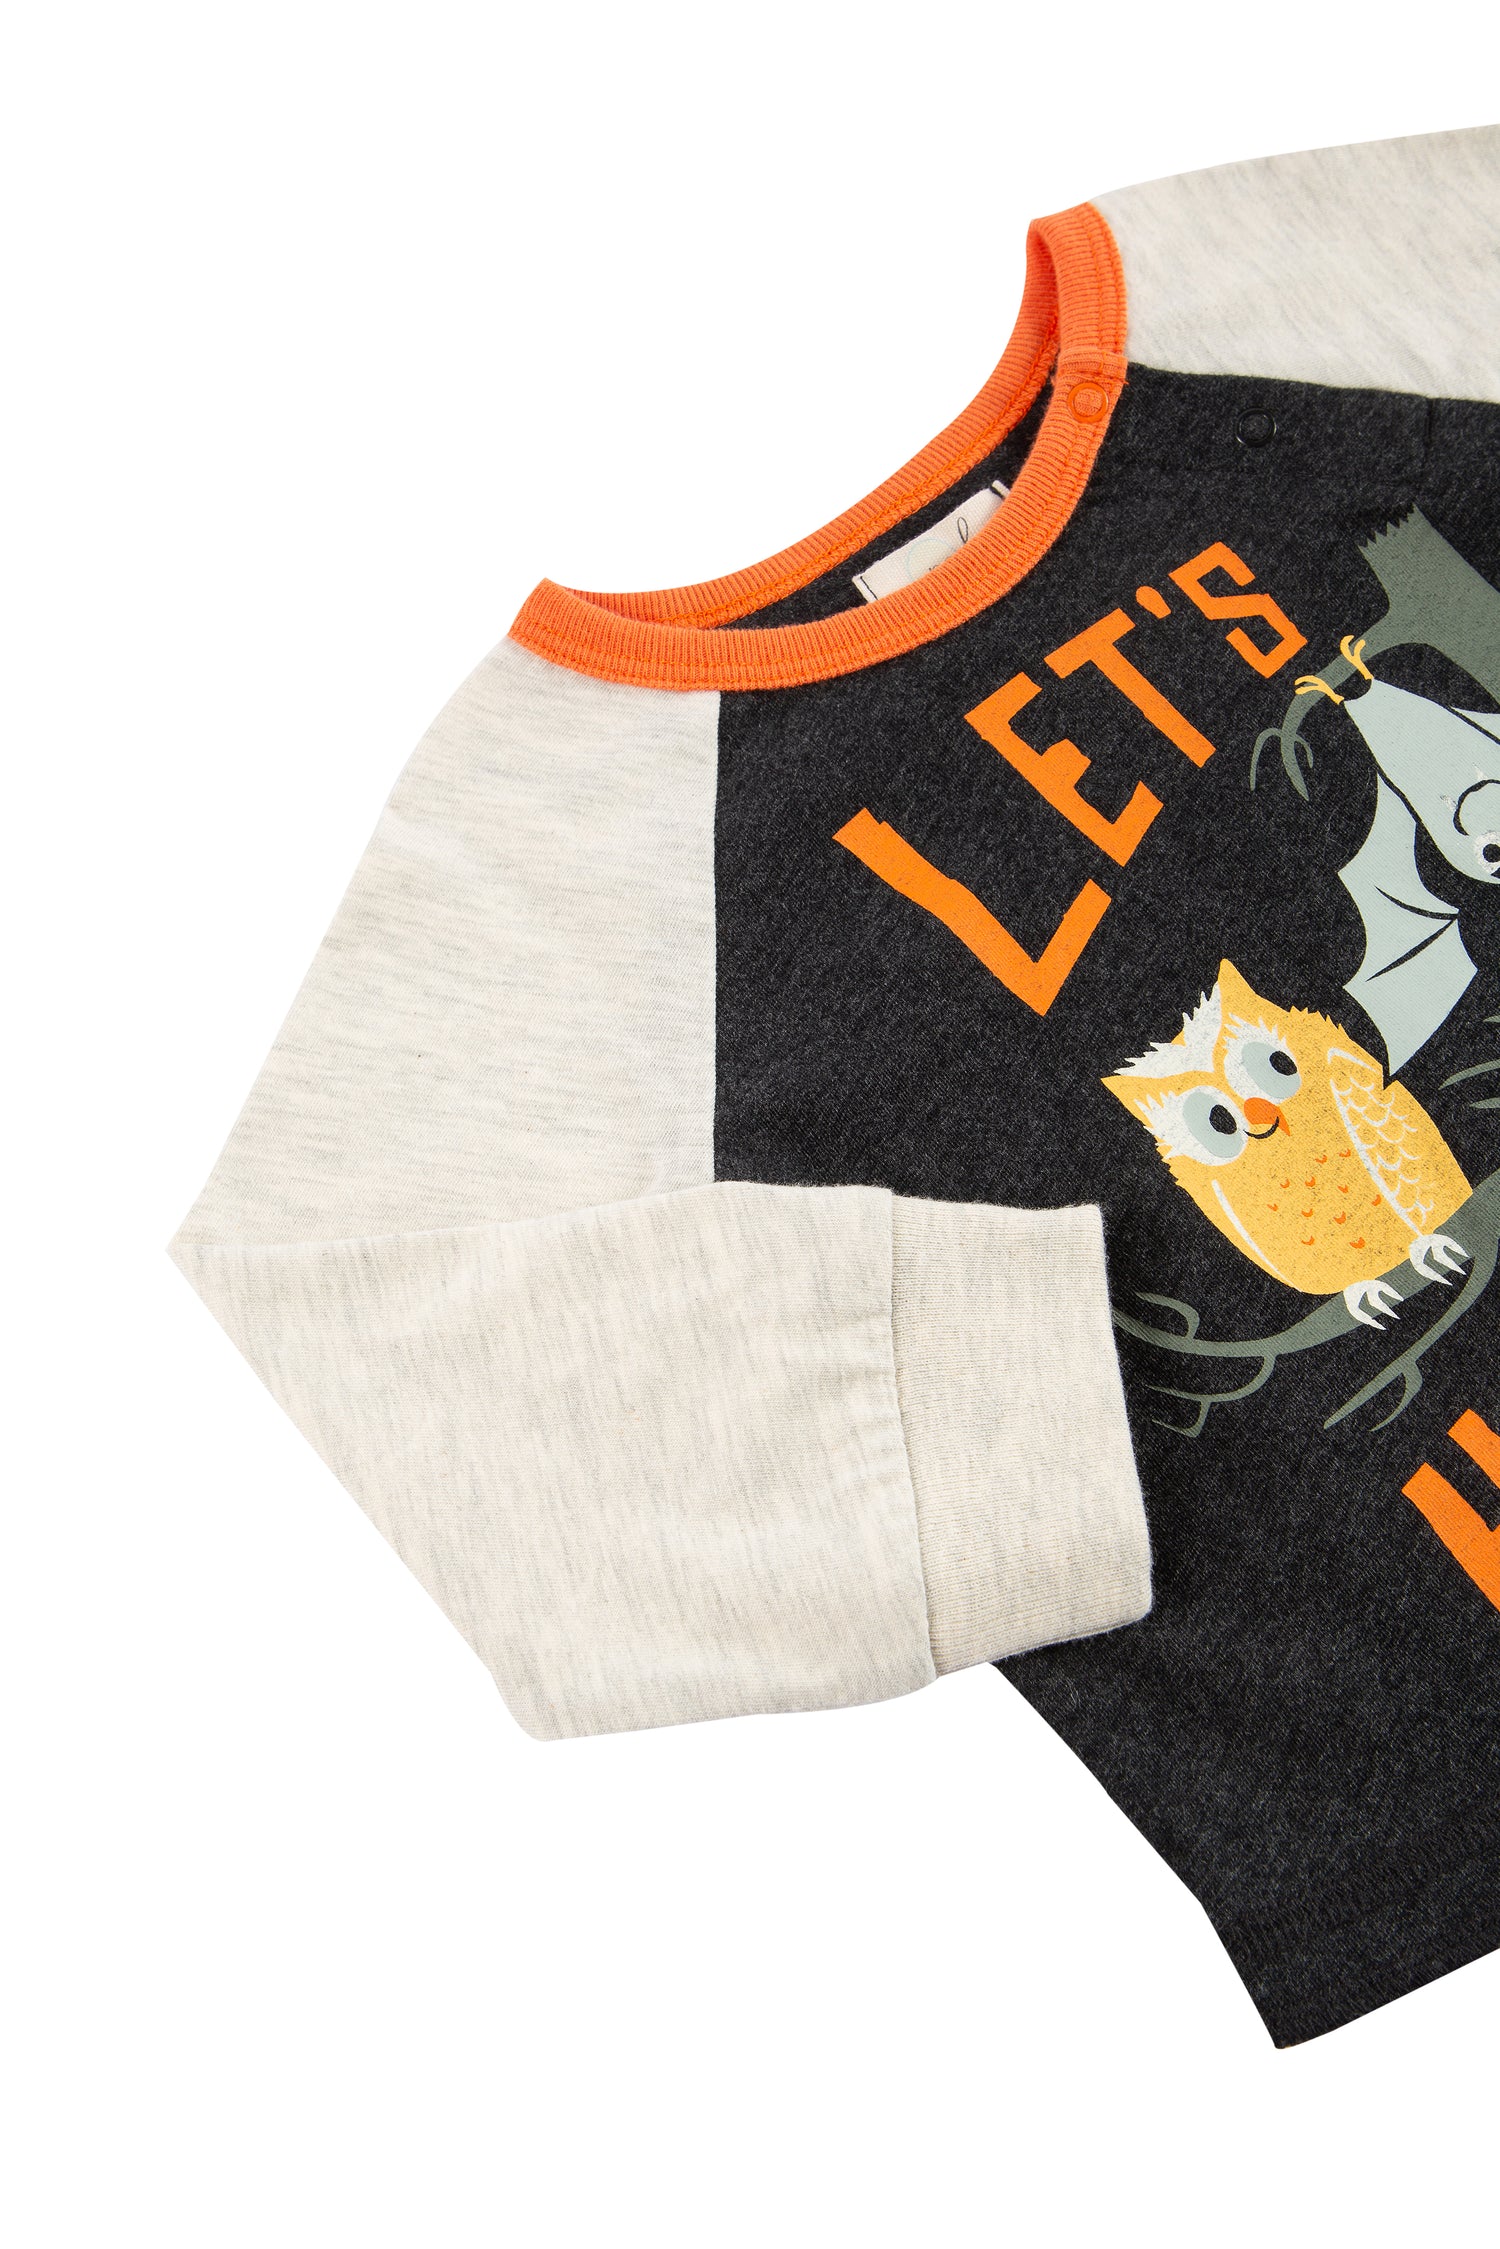 CLOSE UP OF ORANGE BLACK AND WHITE HALLOWEEN THEMED  RAGLAN WITH AN OWL AND BAT ON THE FRONT AND "LET'S HANG"